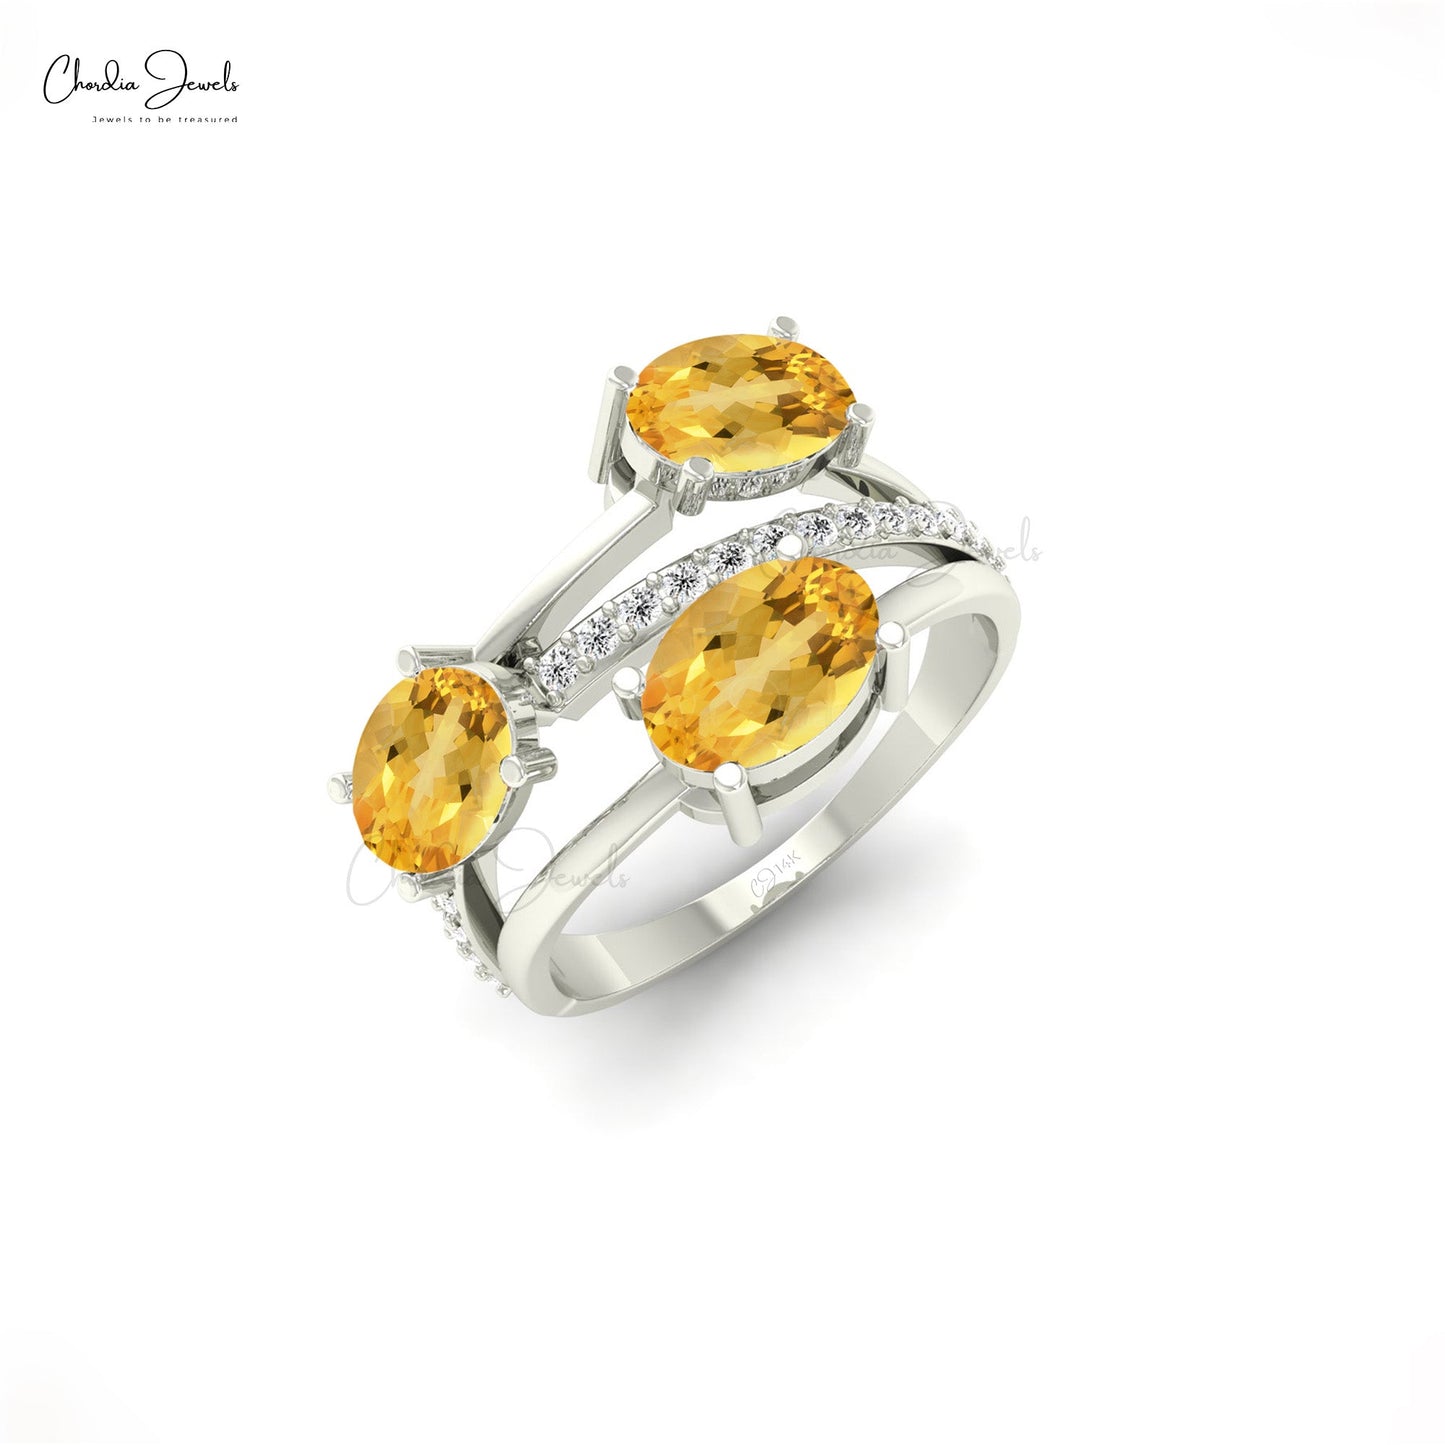 14K Solid Gold Stunning Citrine And Diamond Three-Stone Ring For Wedding